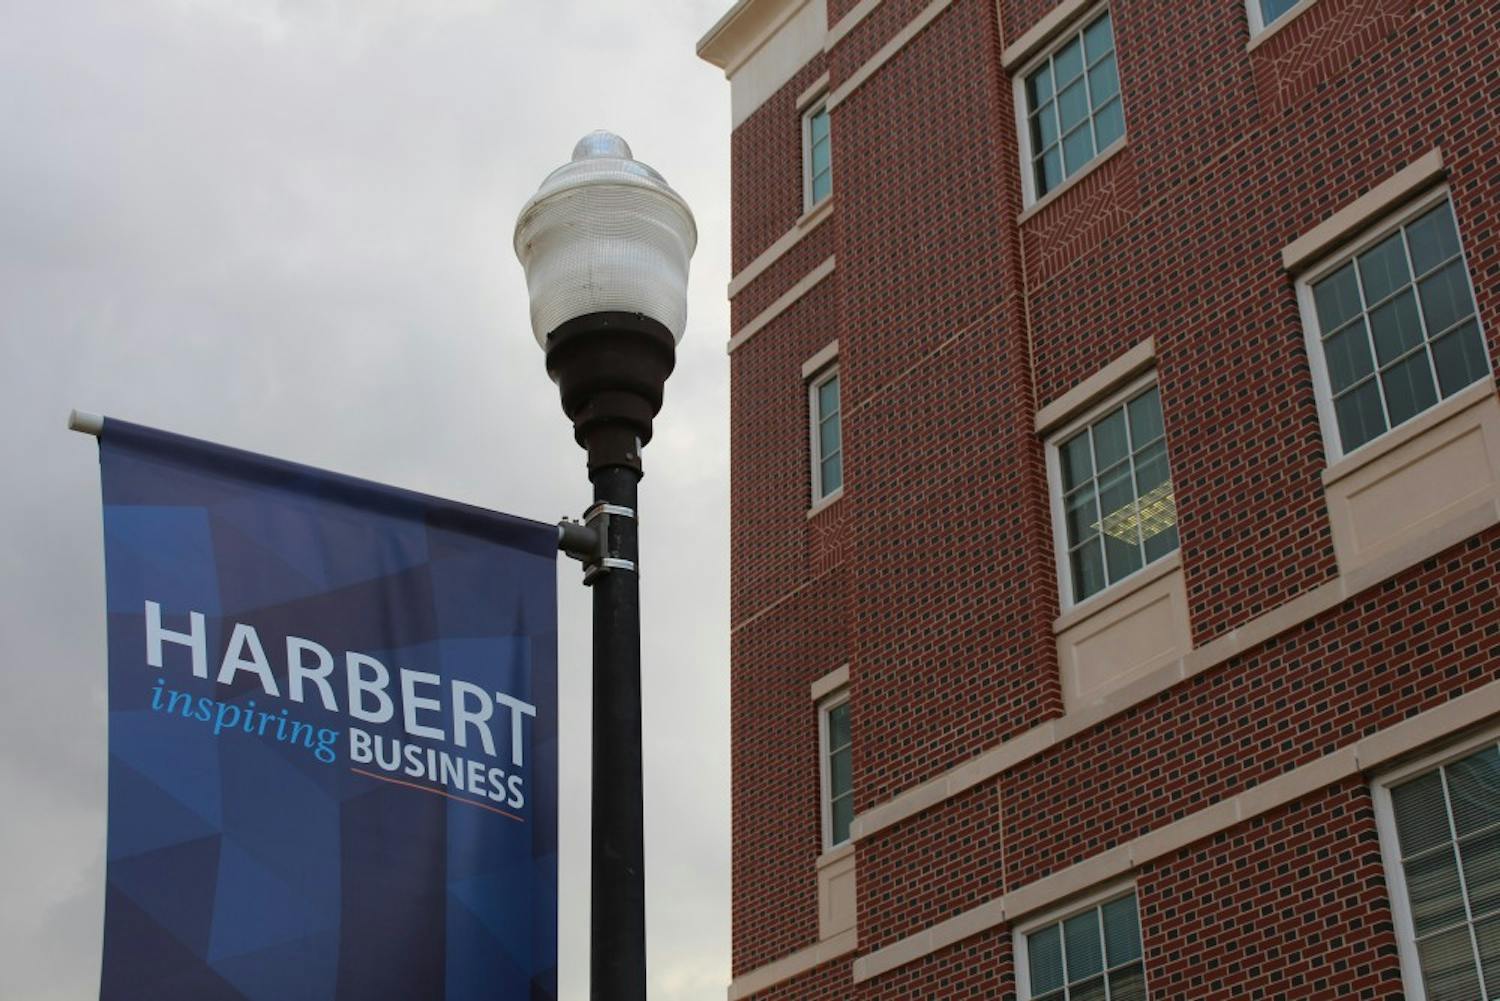 The Harbert College of Business is located in Lowder Hall,&nbsp;taken on Saturday, Feb 24, 2018 in Auburn, Ala.